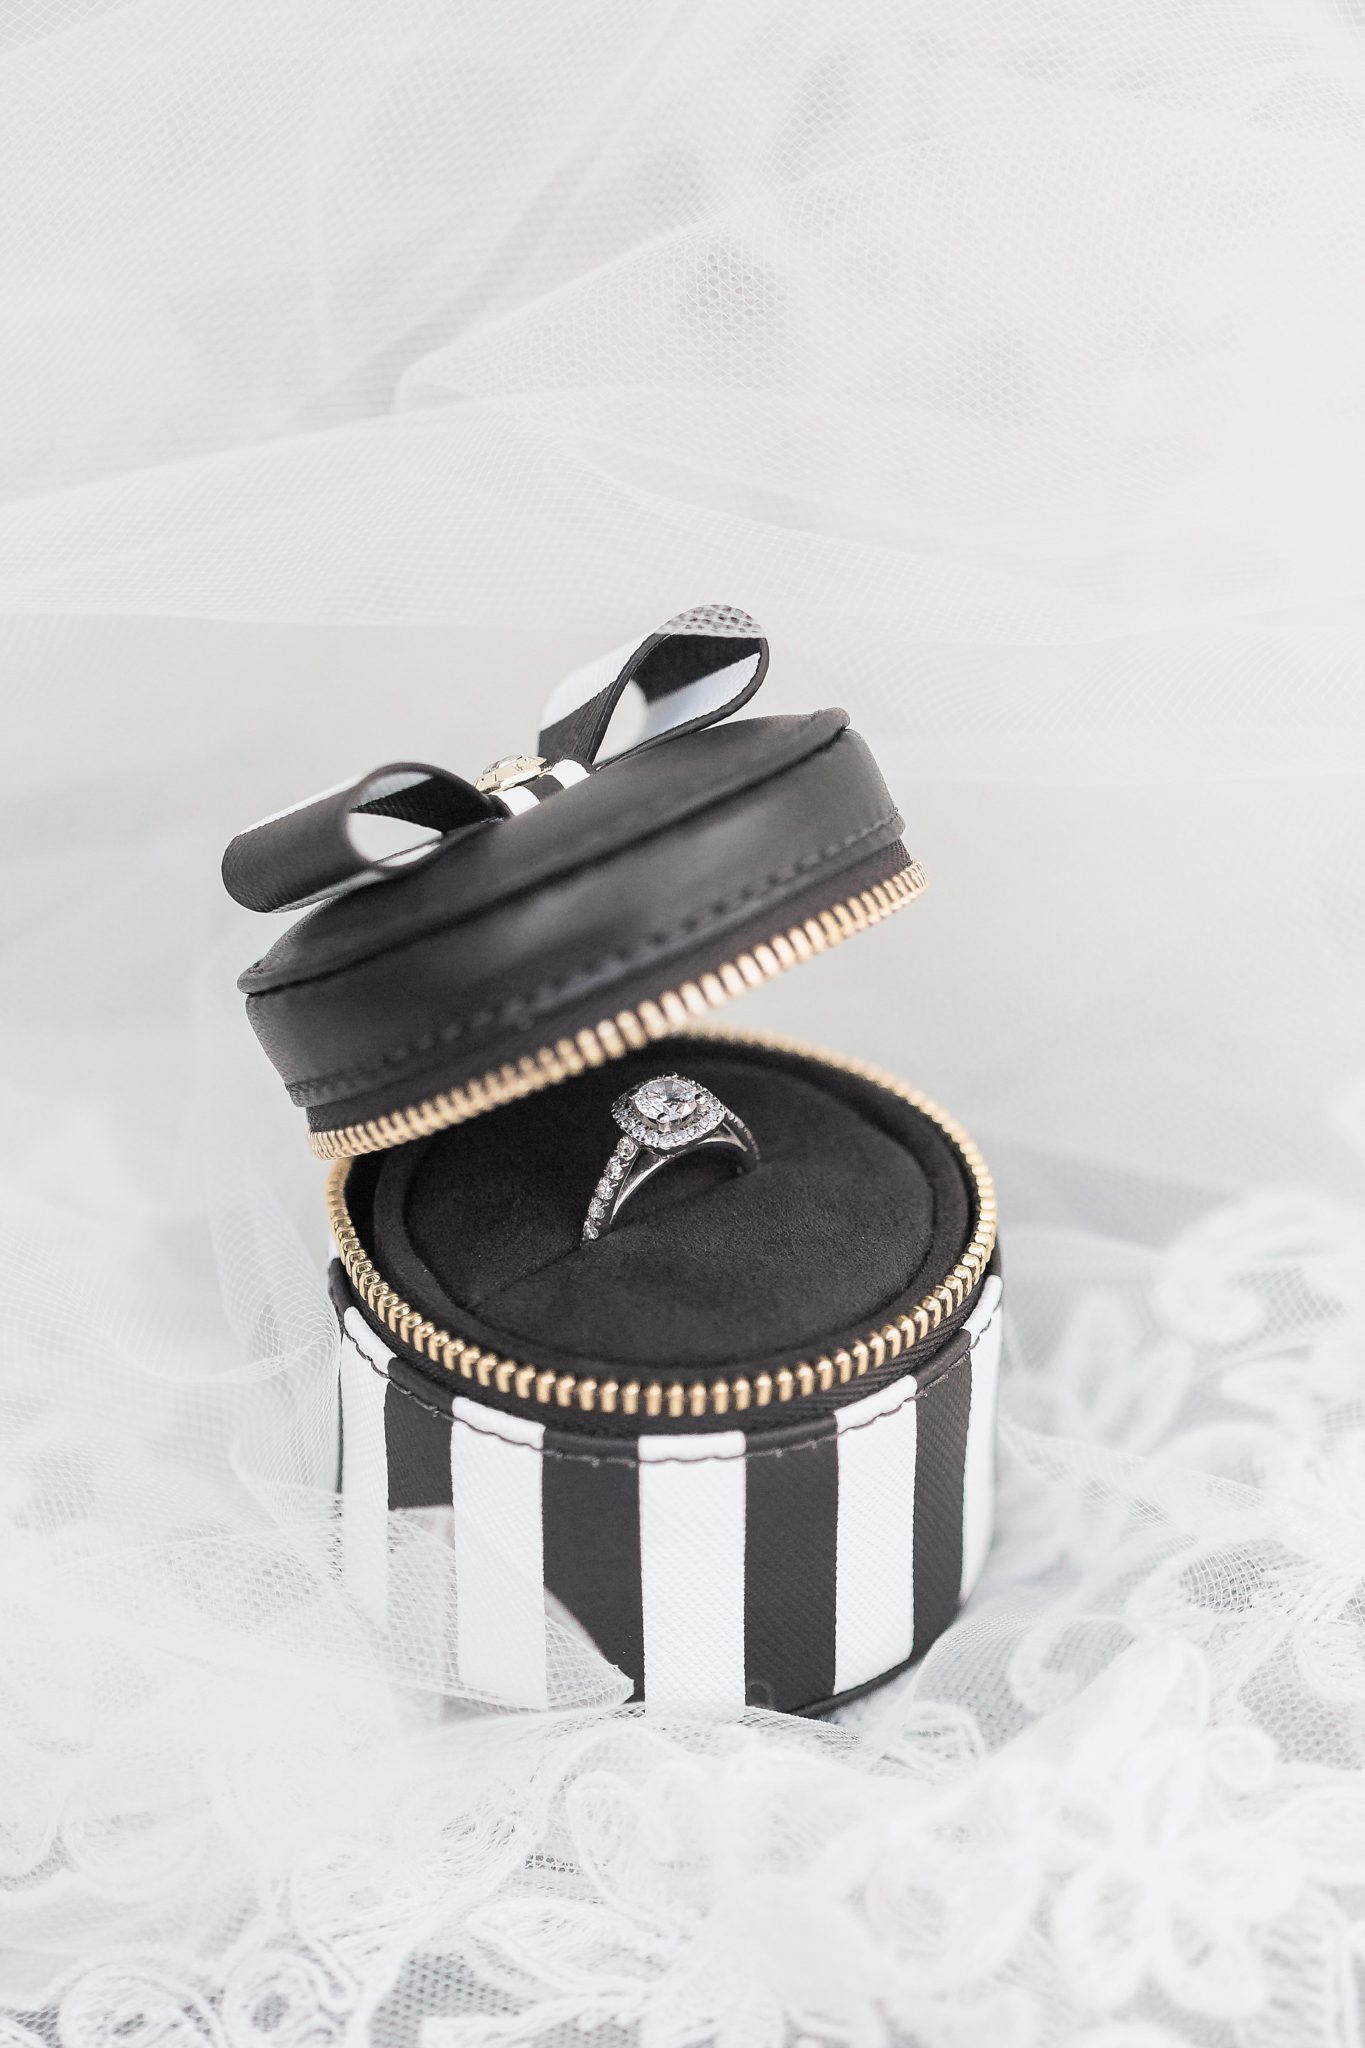 This Washington, DC wedding photographer knows a thing or two about styling details! She is sharing 3 must-have ring boxes for any bride-to-be.